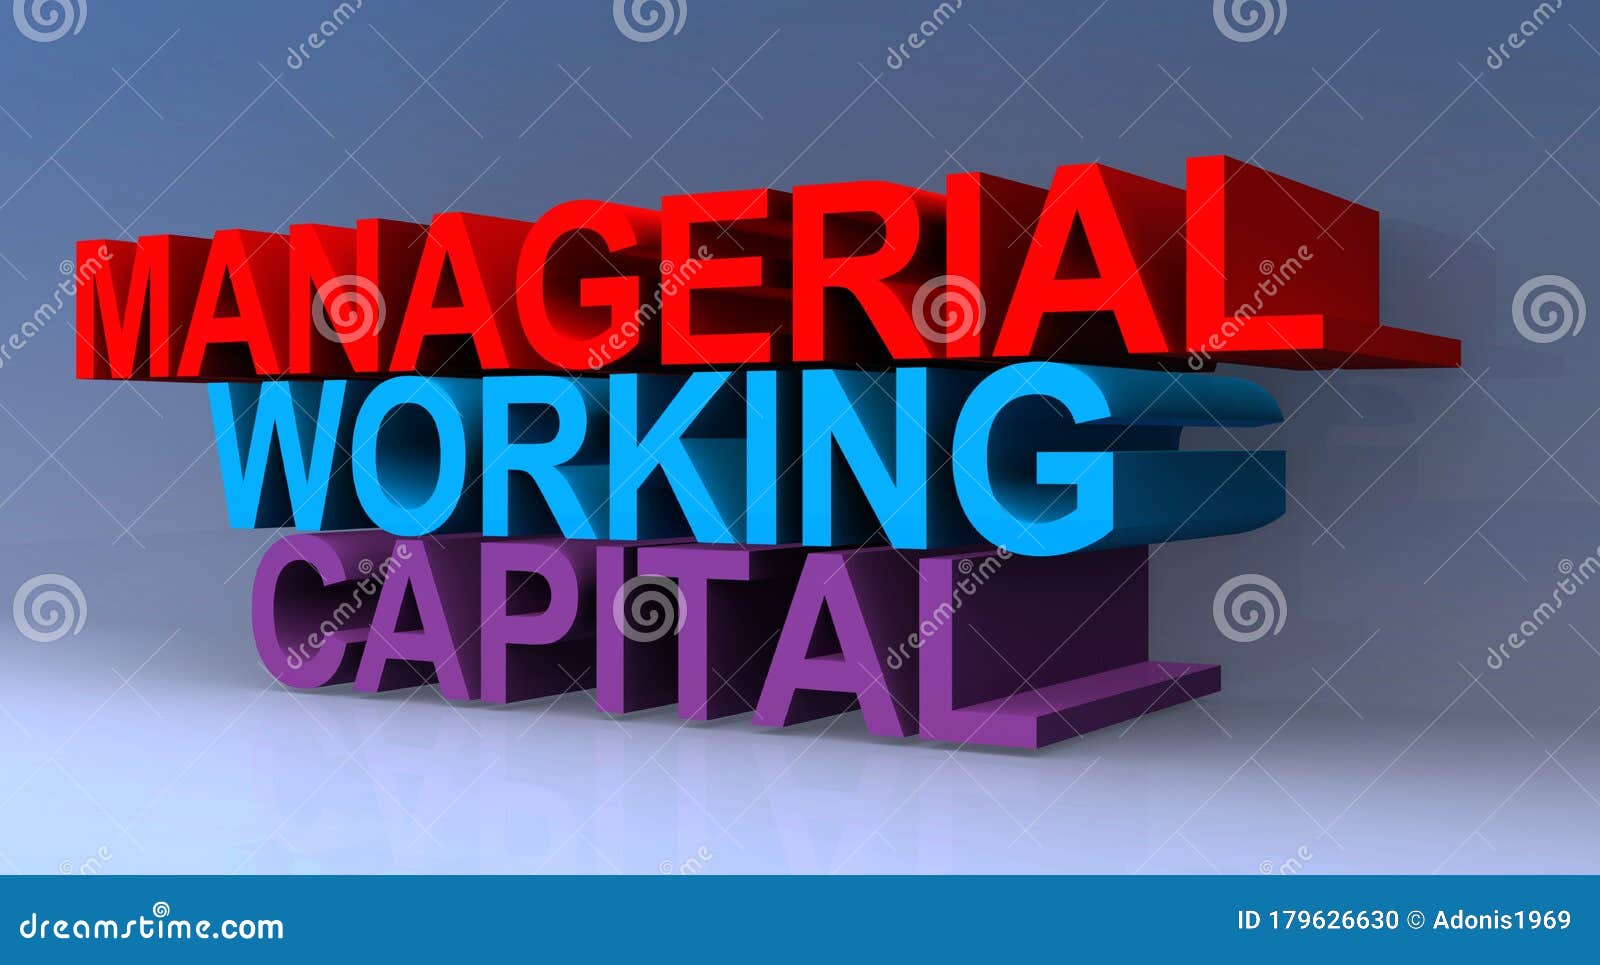 managerial working capital